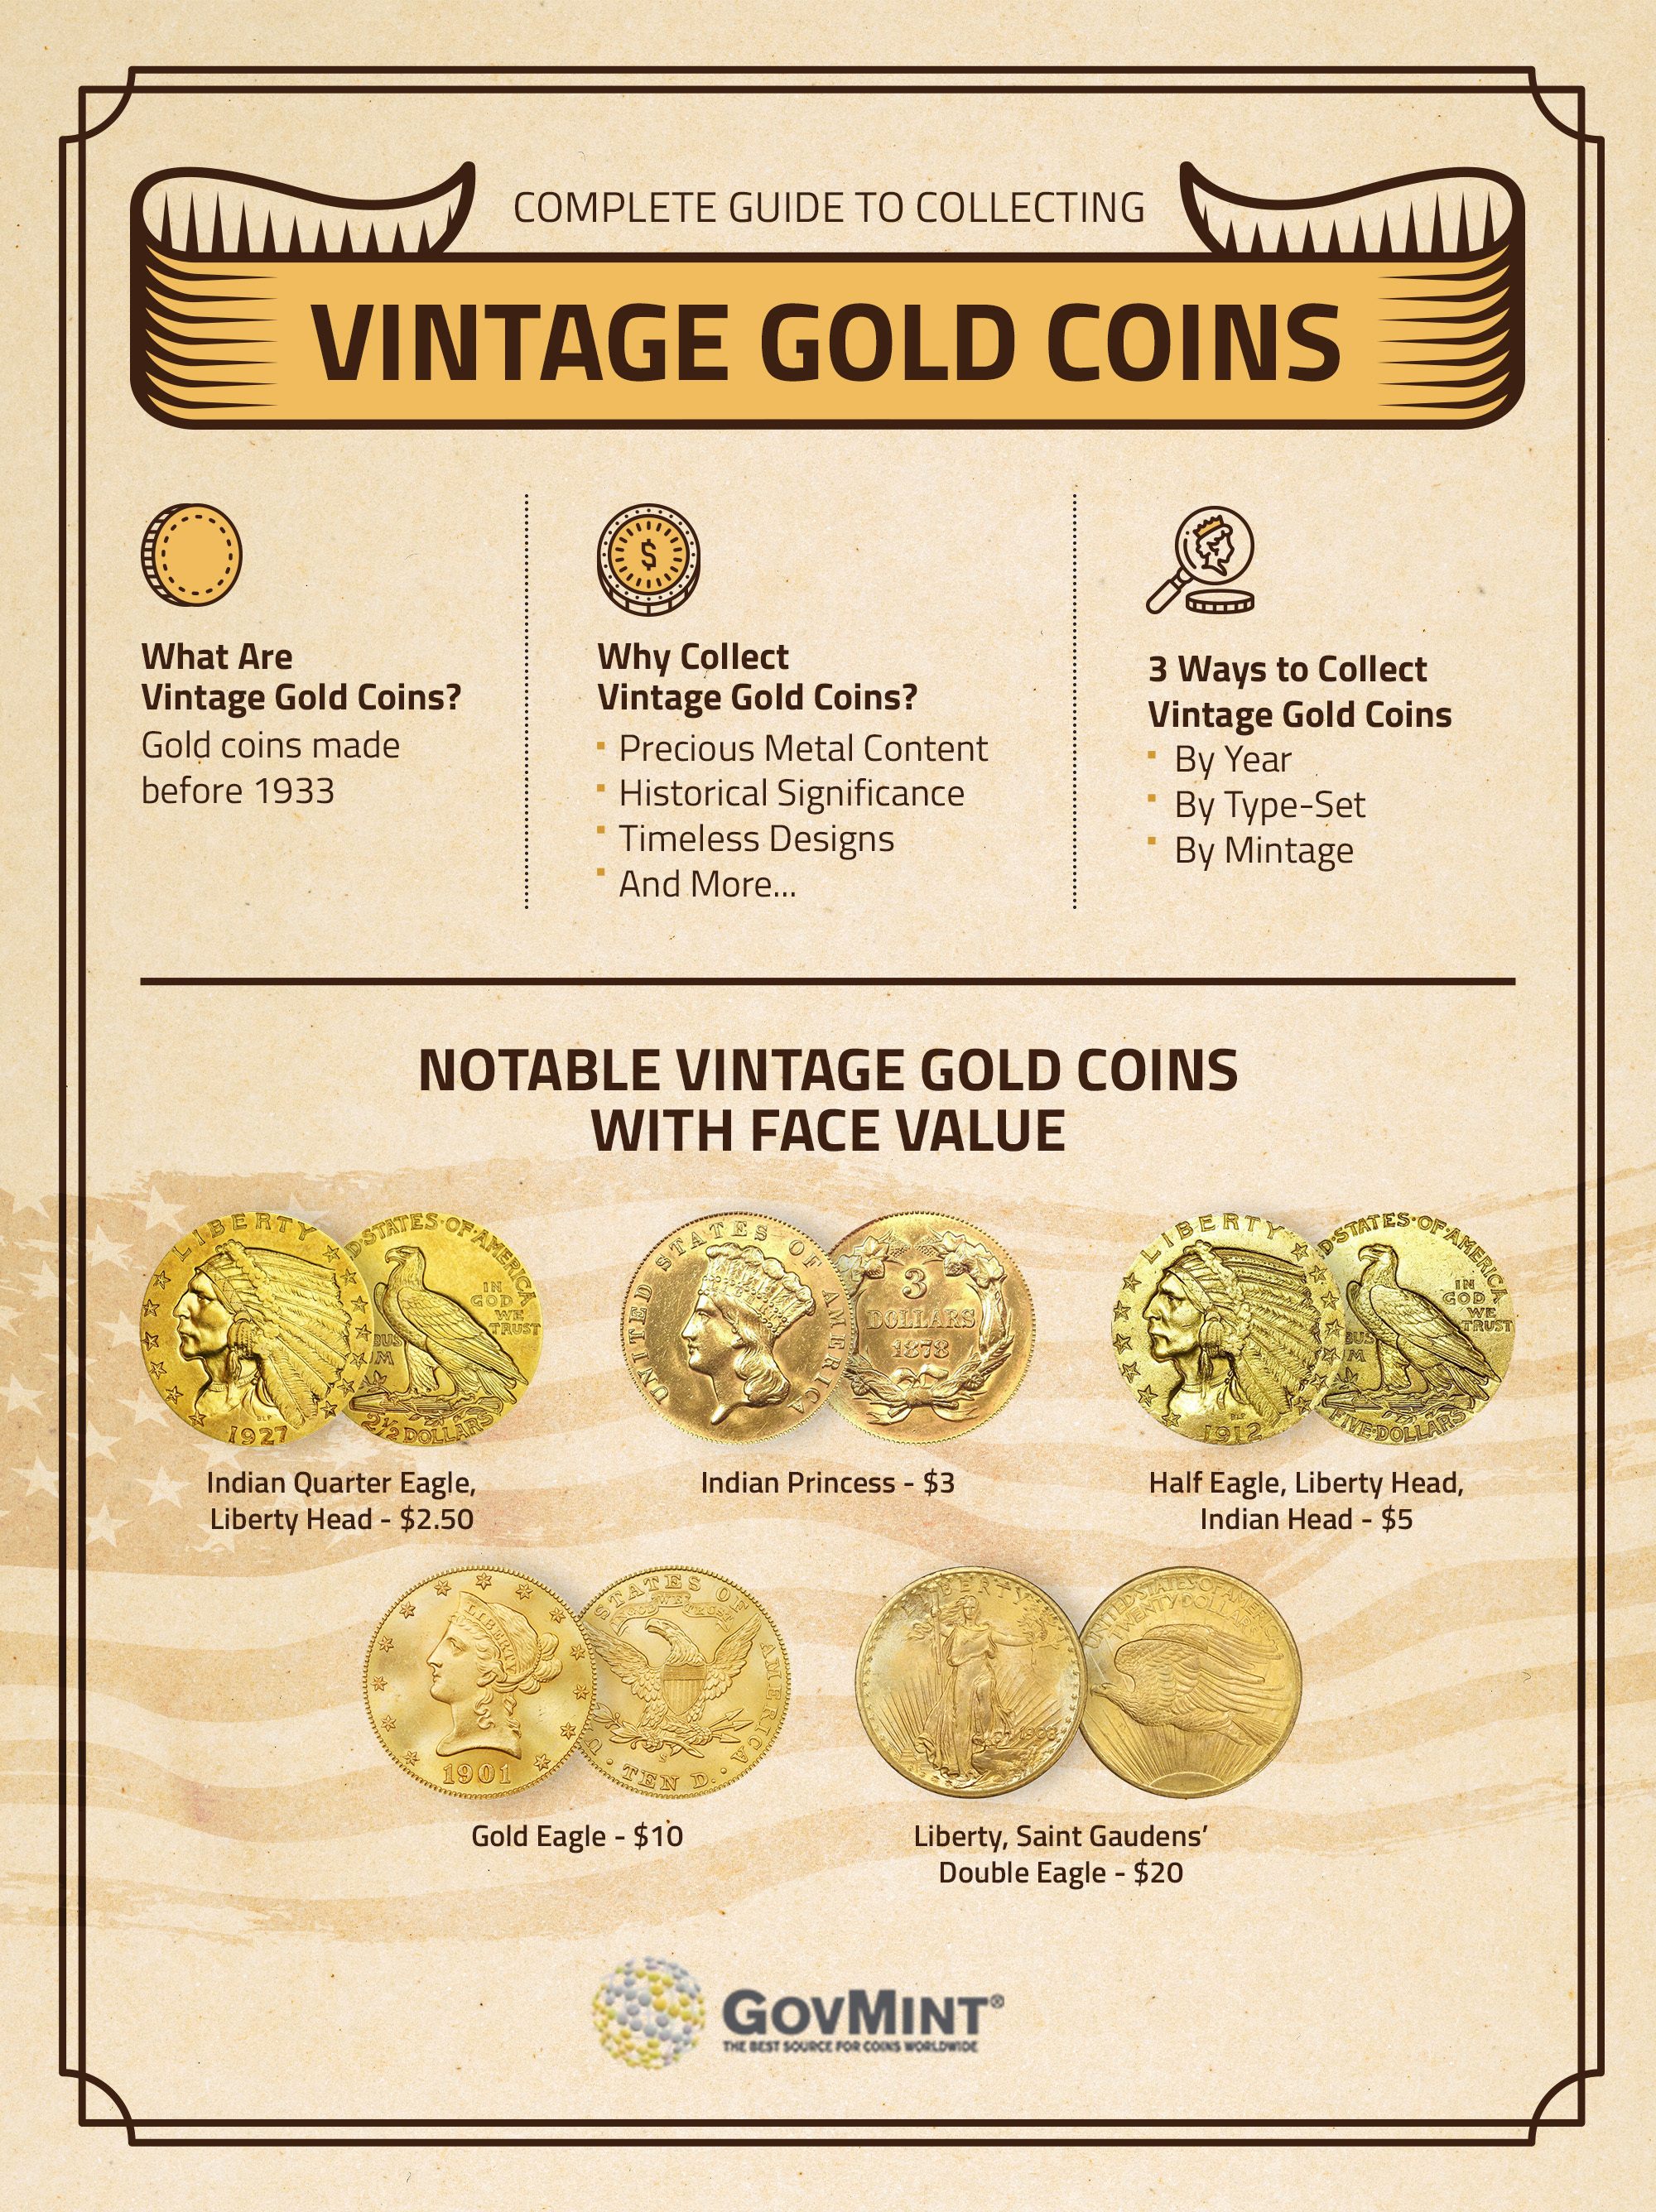 Complete Guide to Vintage Gold Coins